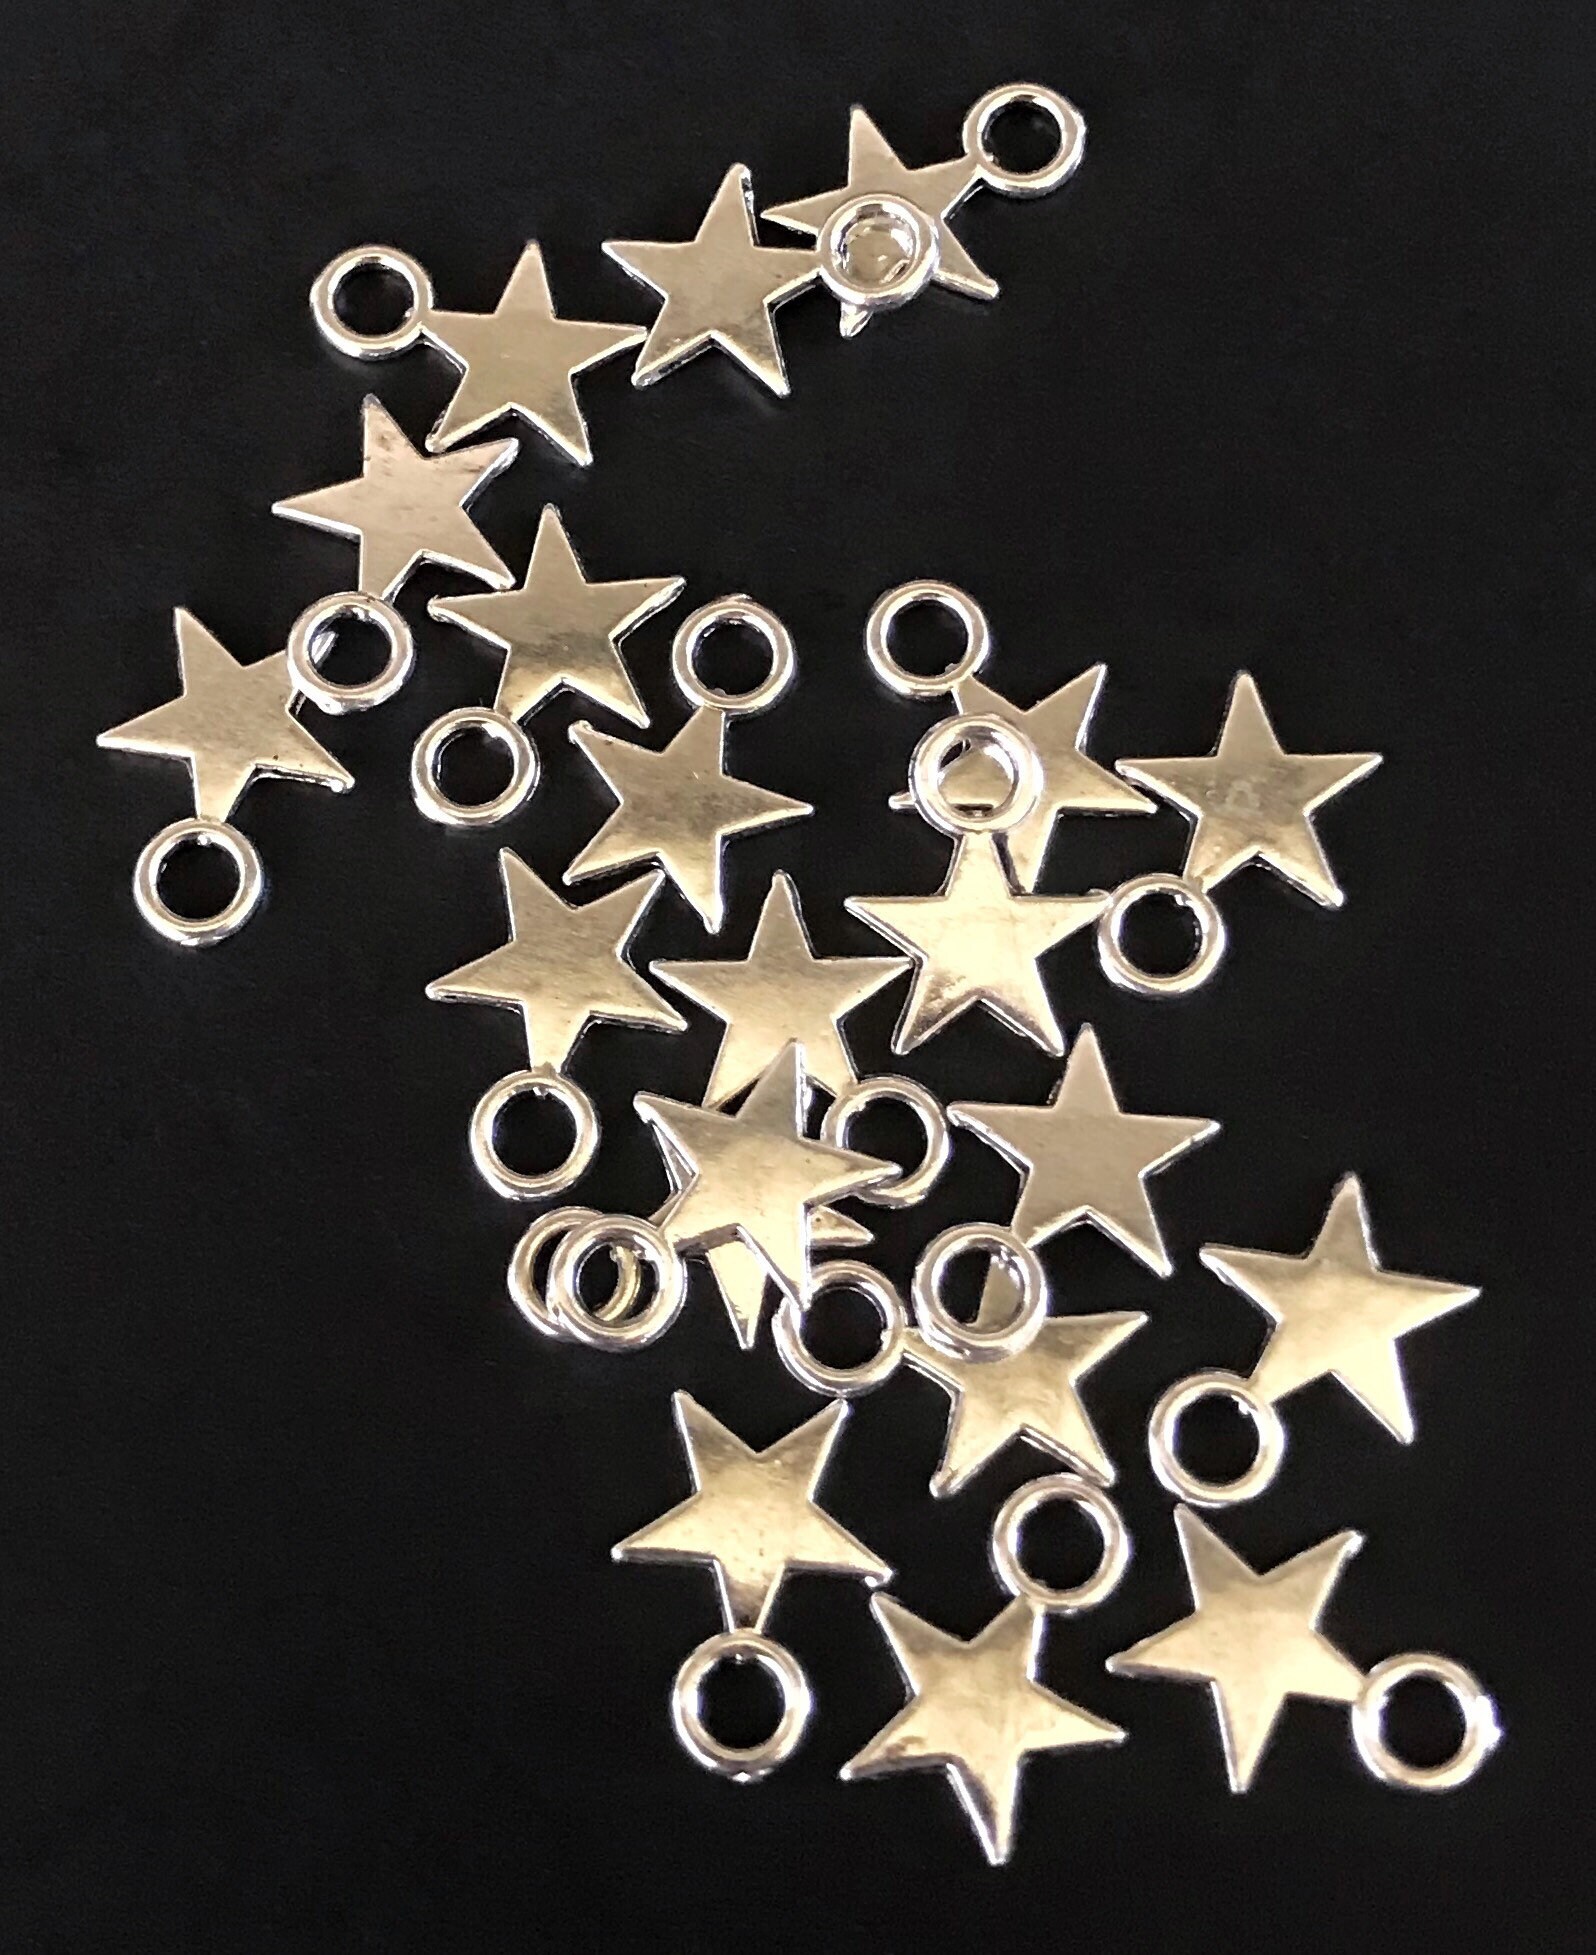 20 Star Charms, Small Flat Double Sided Stars, Jewelry Making